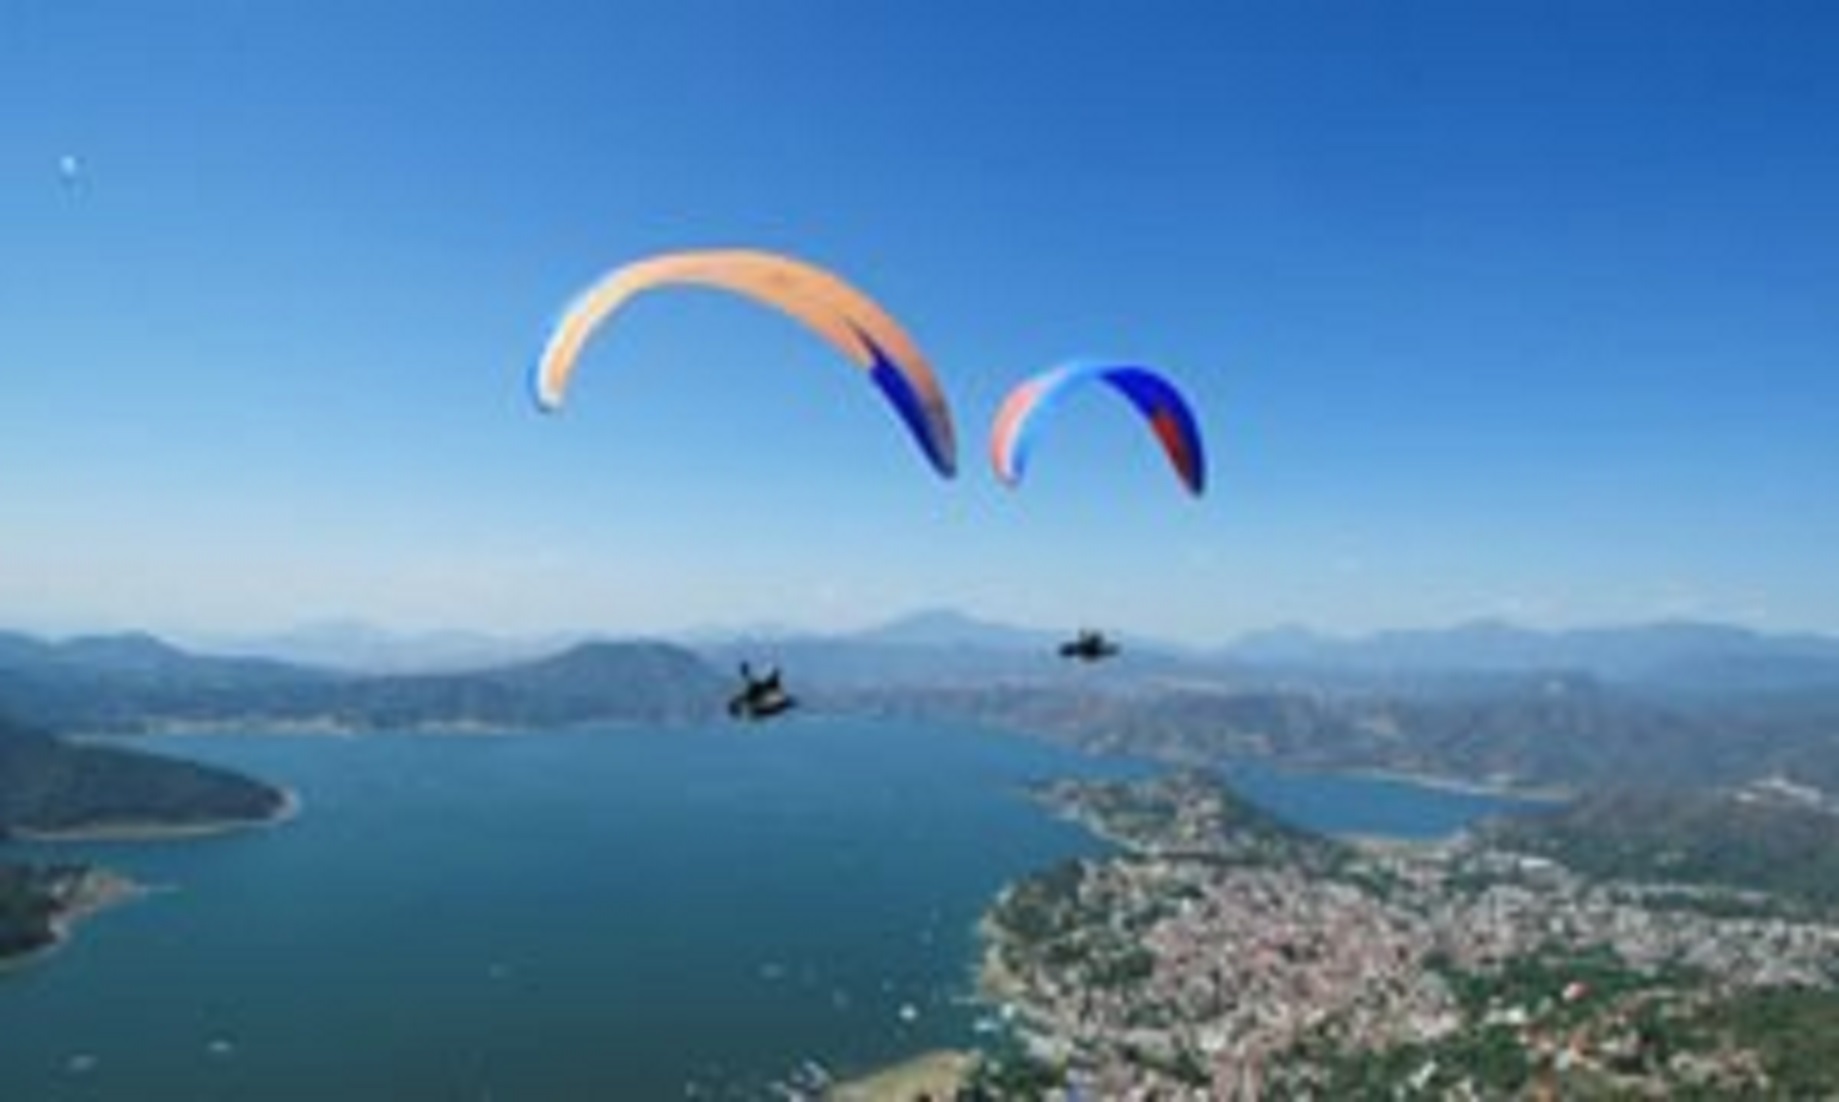 Three Paragliding Pilots Wounded After Colliding In Mid-Air In SW Turkey